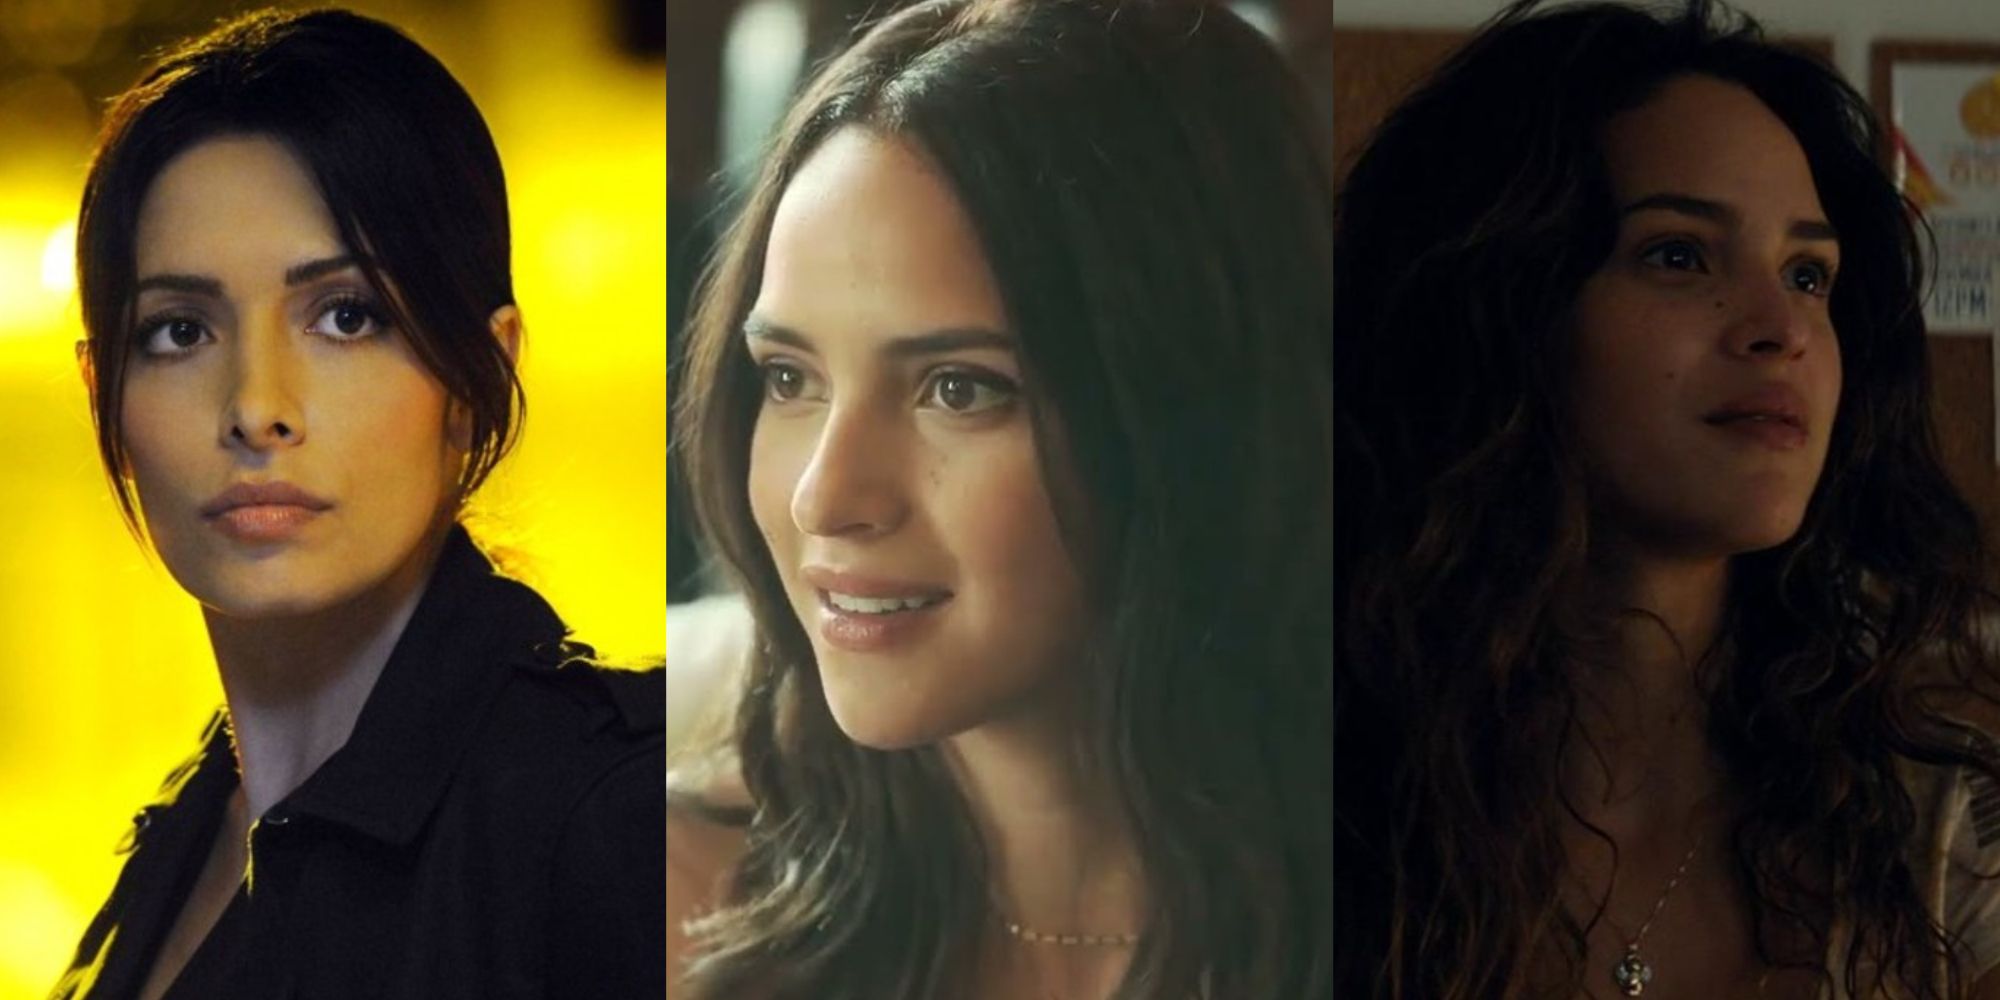 Andor: Adria Arjona’s 8 Best Movies & TV Shows, Ranked (According To Rotten Tomatoes)